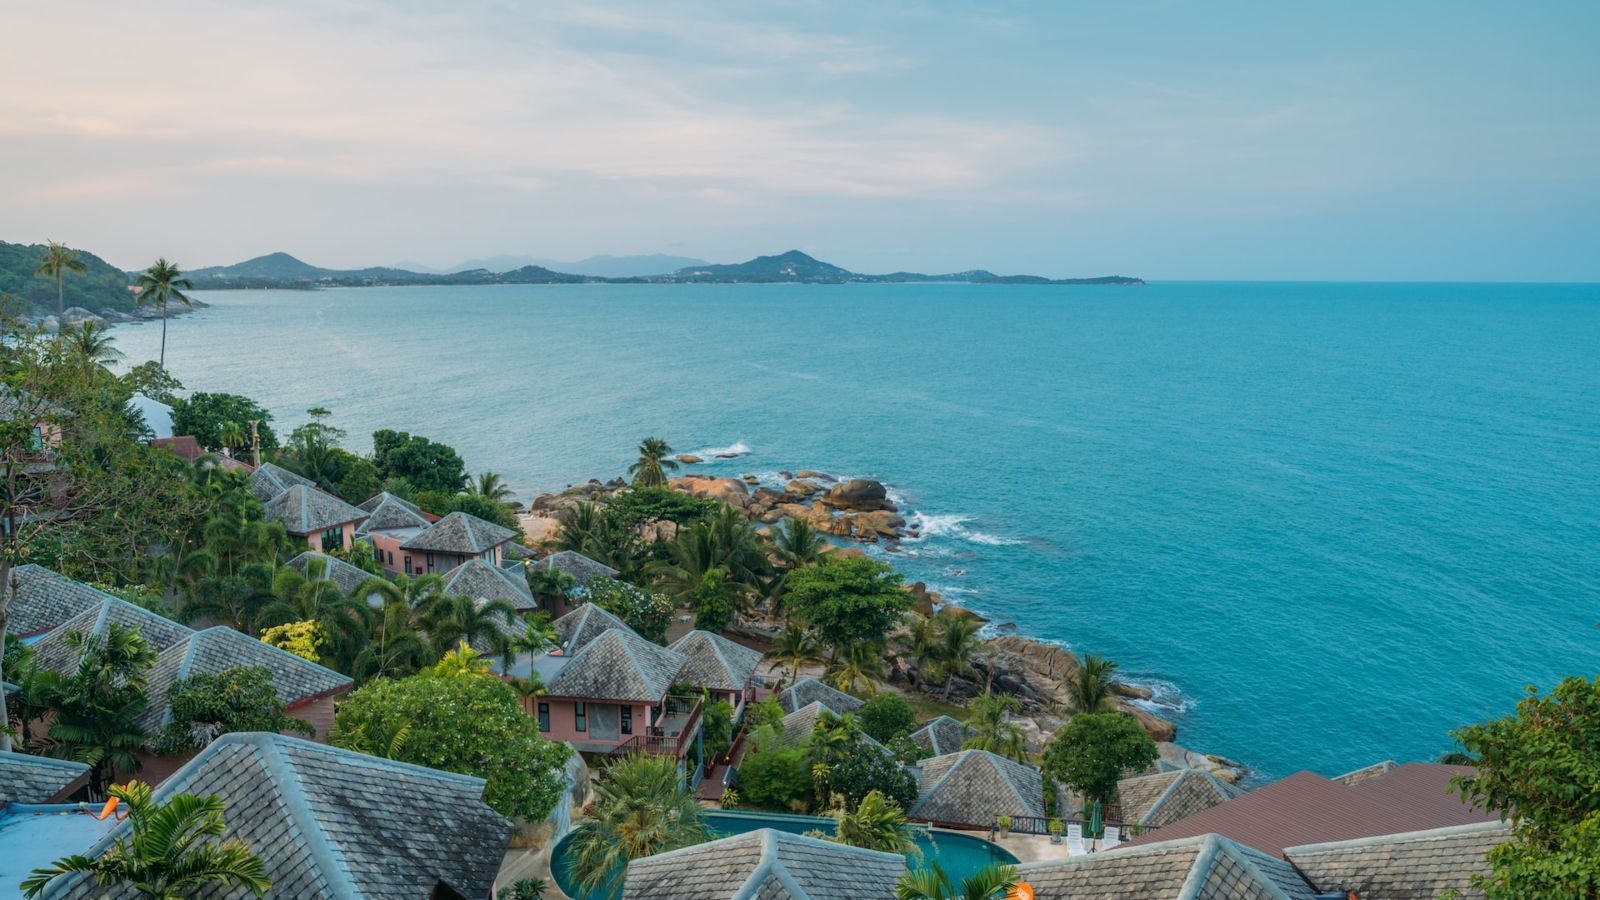 Where to stay in Thailand - Koh Samui